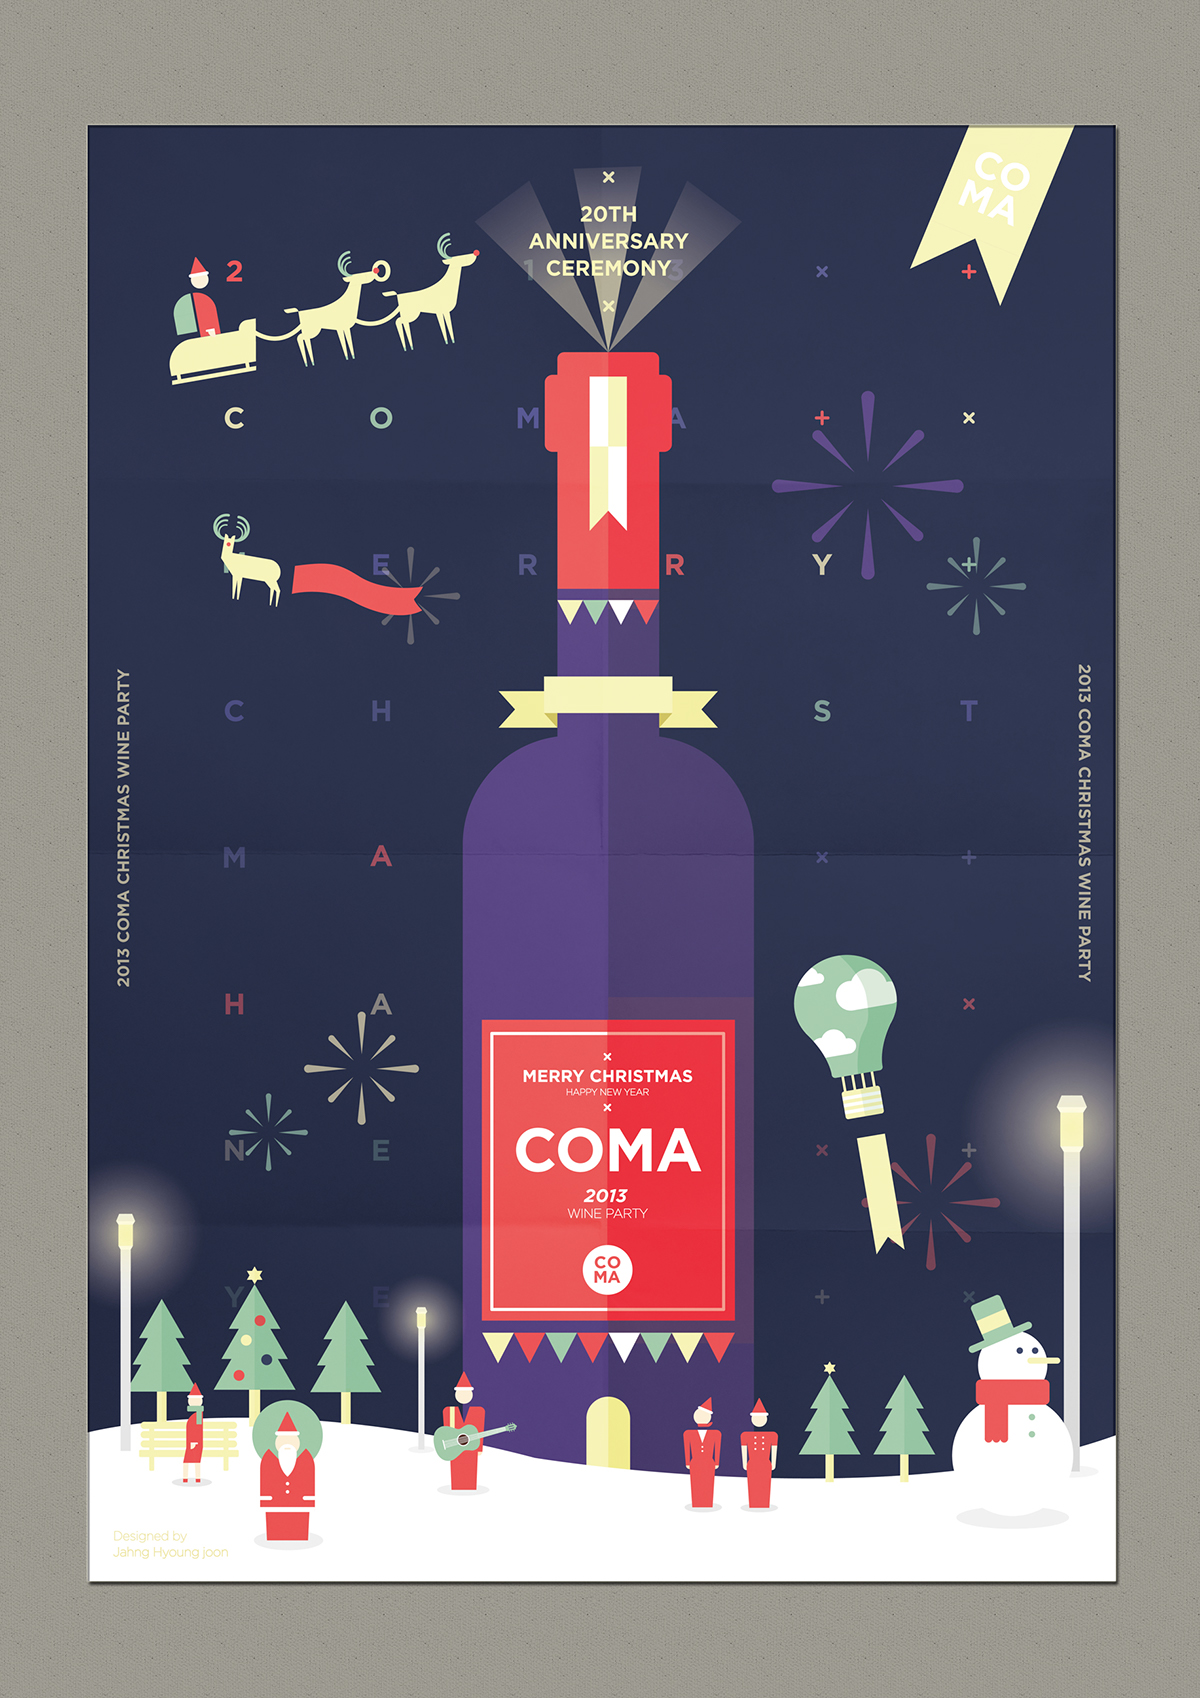 Christmas merry happy new year party poster santa wine pictogram Character gift illust graphic Coma